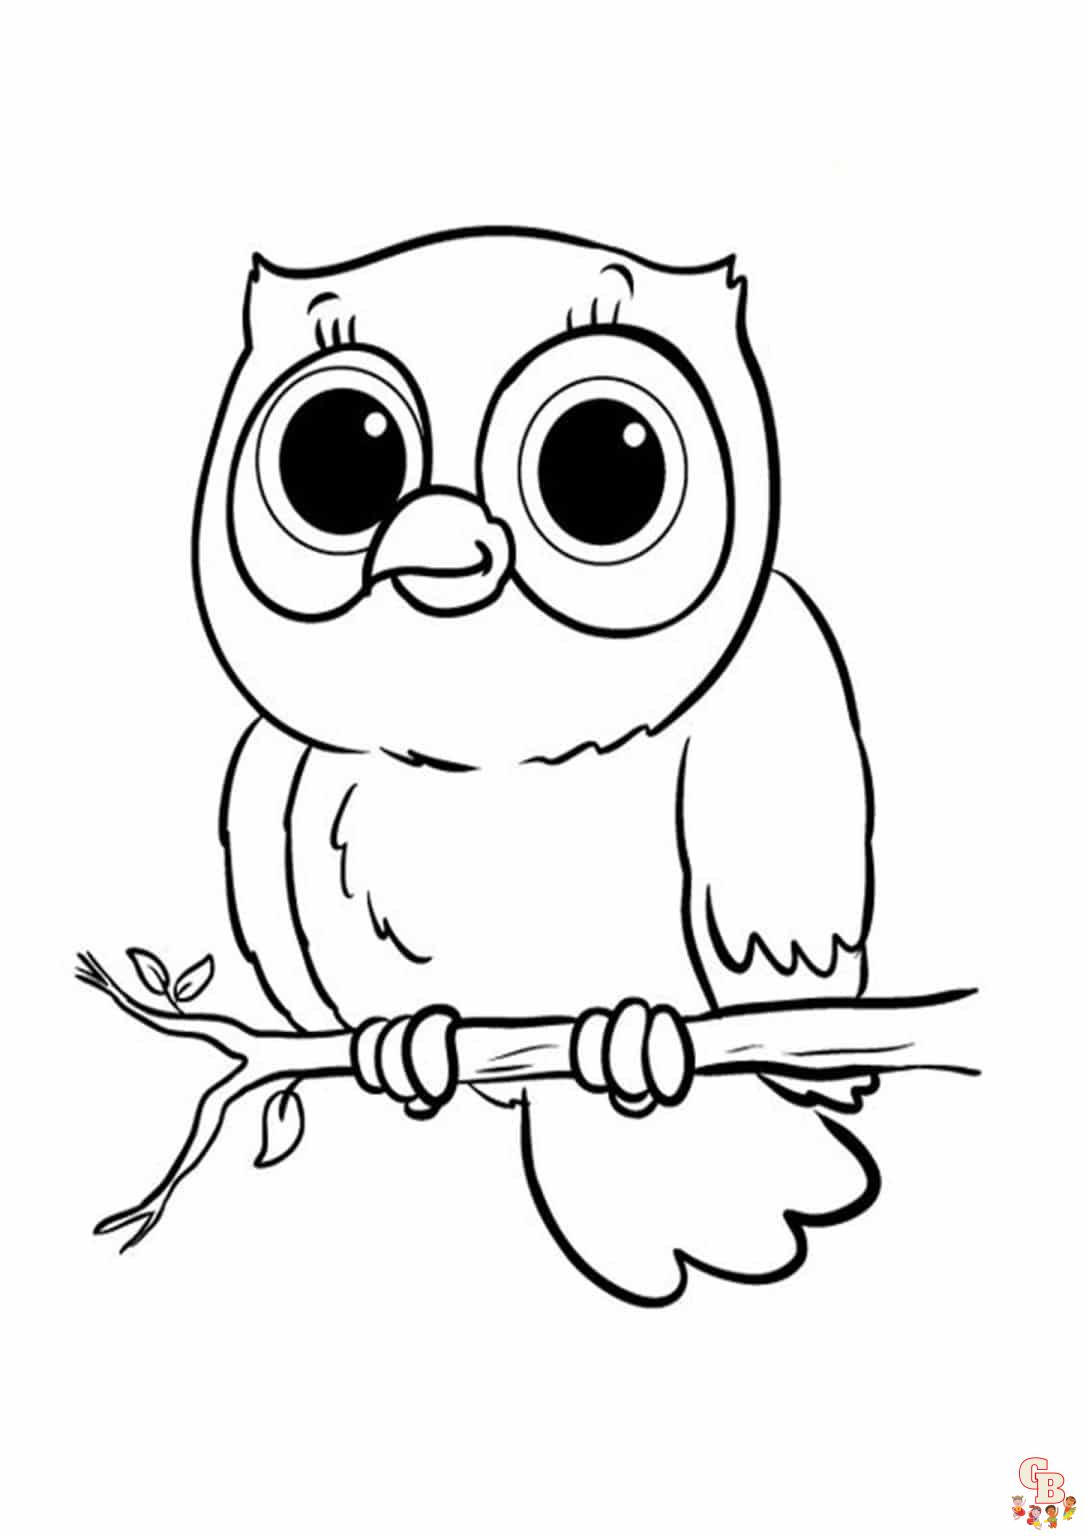 Cute Owl Coloring Pages 6